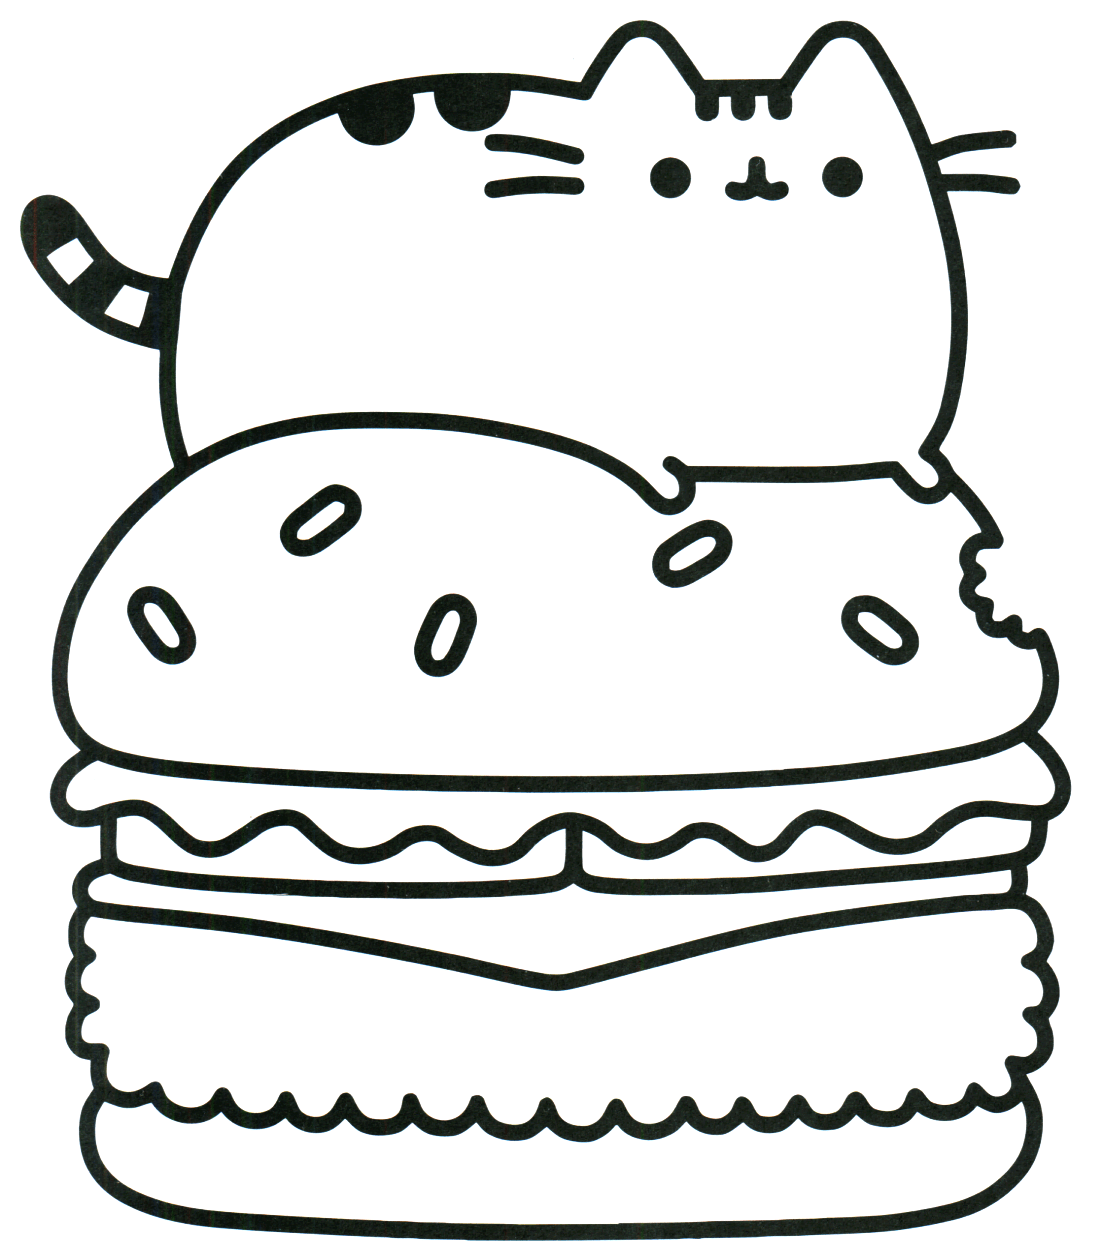 Pusheen Cat Coloring Pages Cat Coloring Book Pusheen Coloring Pages Unicorn Coloring